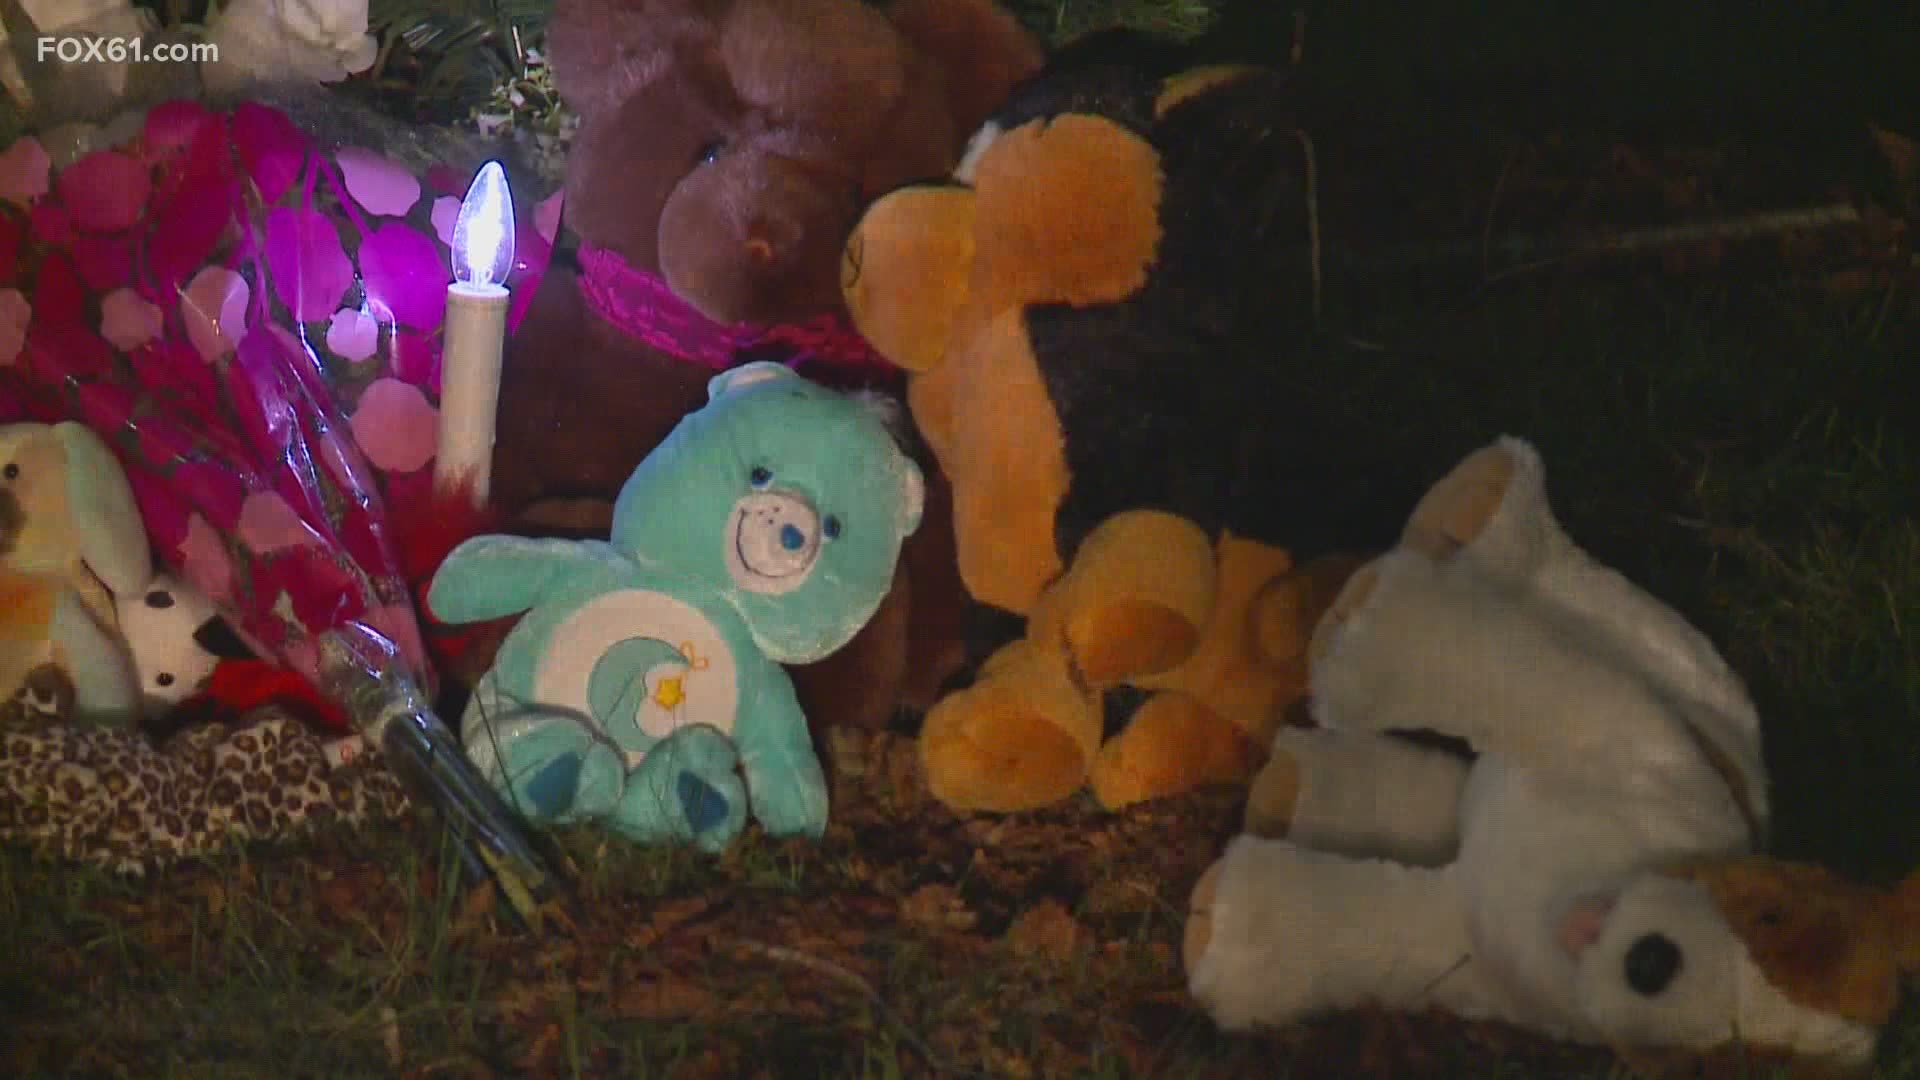 Many in the tight-knit community have visited a memorial on the town green that is draped in prayer ribbons and surrounded by candles and stuffed animals.